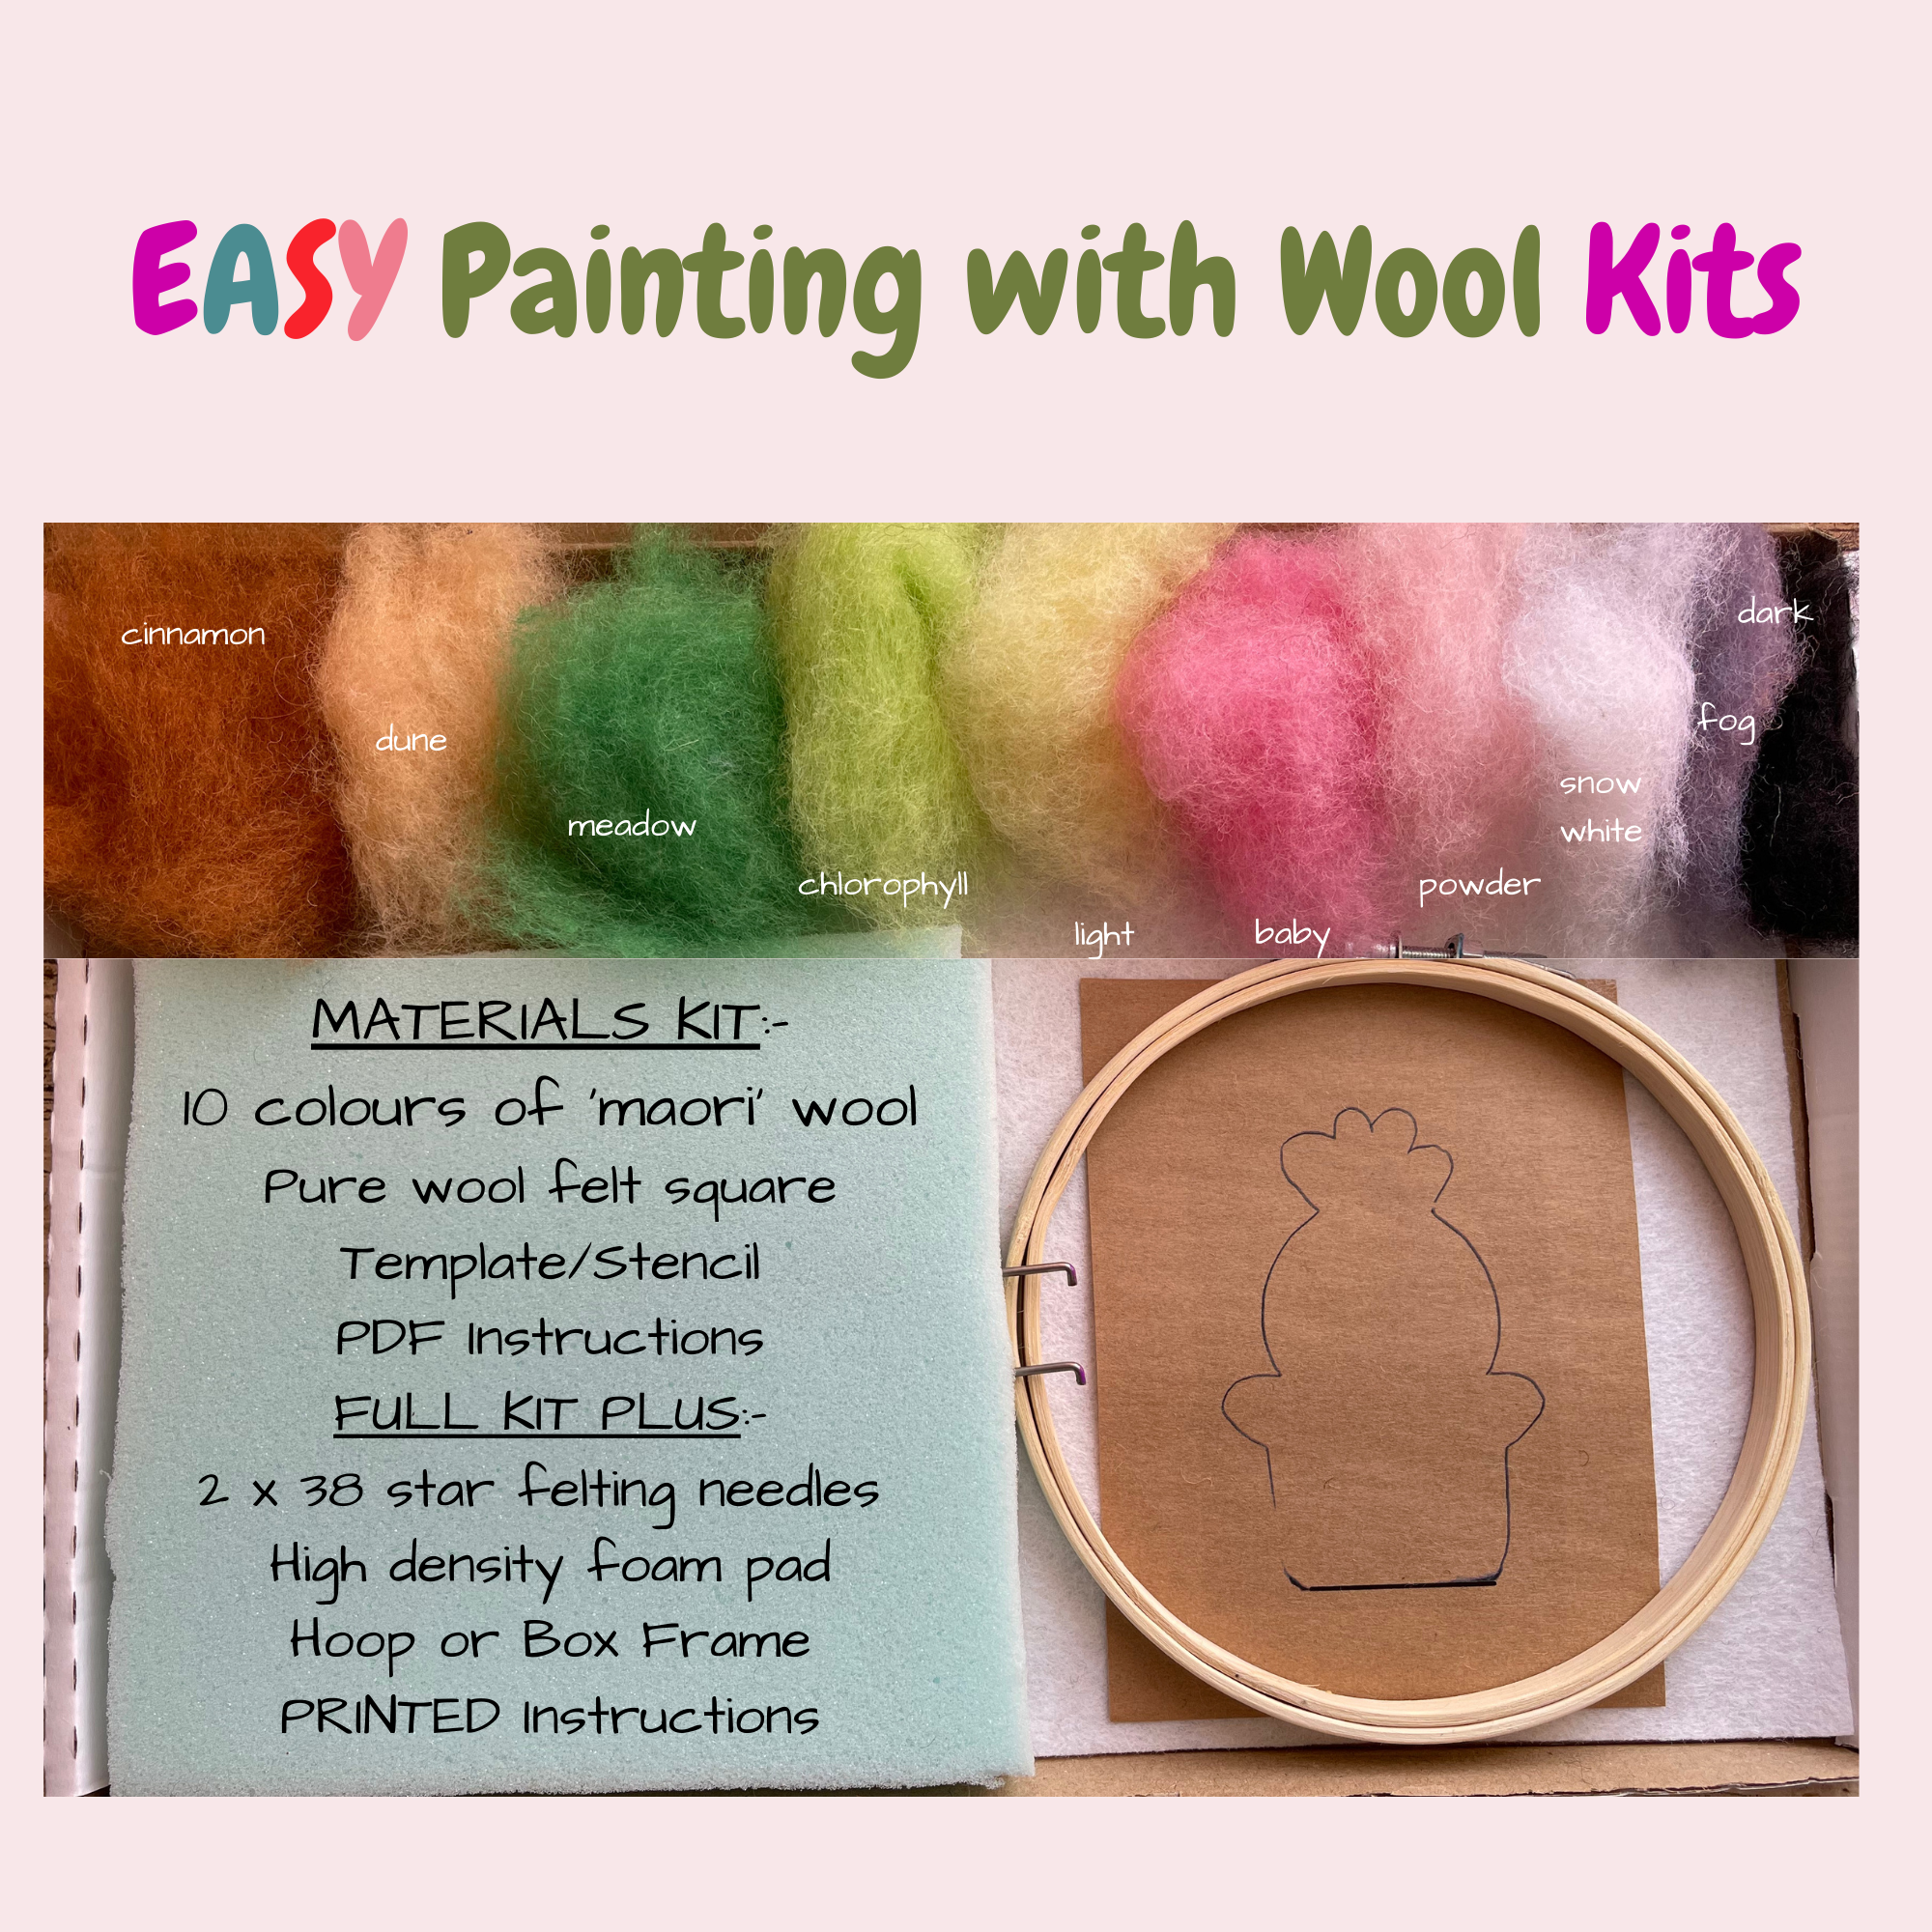 EASY Painting with Wool!   2D Needle Felted Picture Kit - Cactus (1 of 3 in Cactus Set)